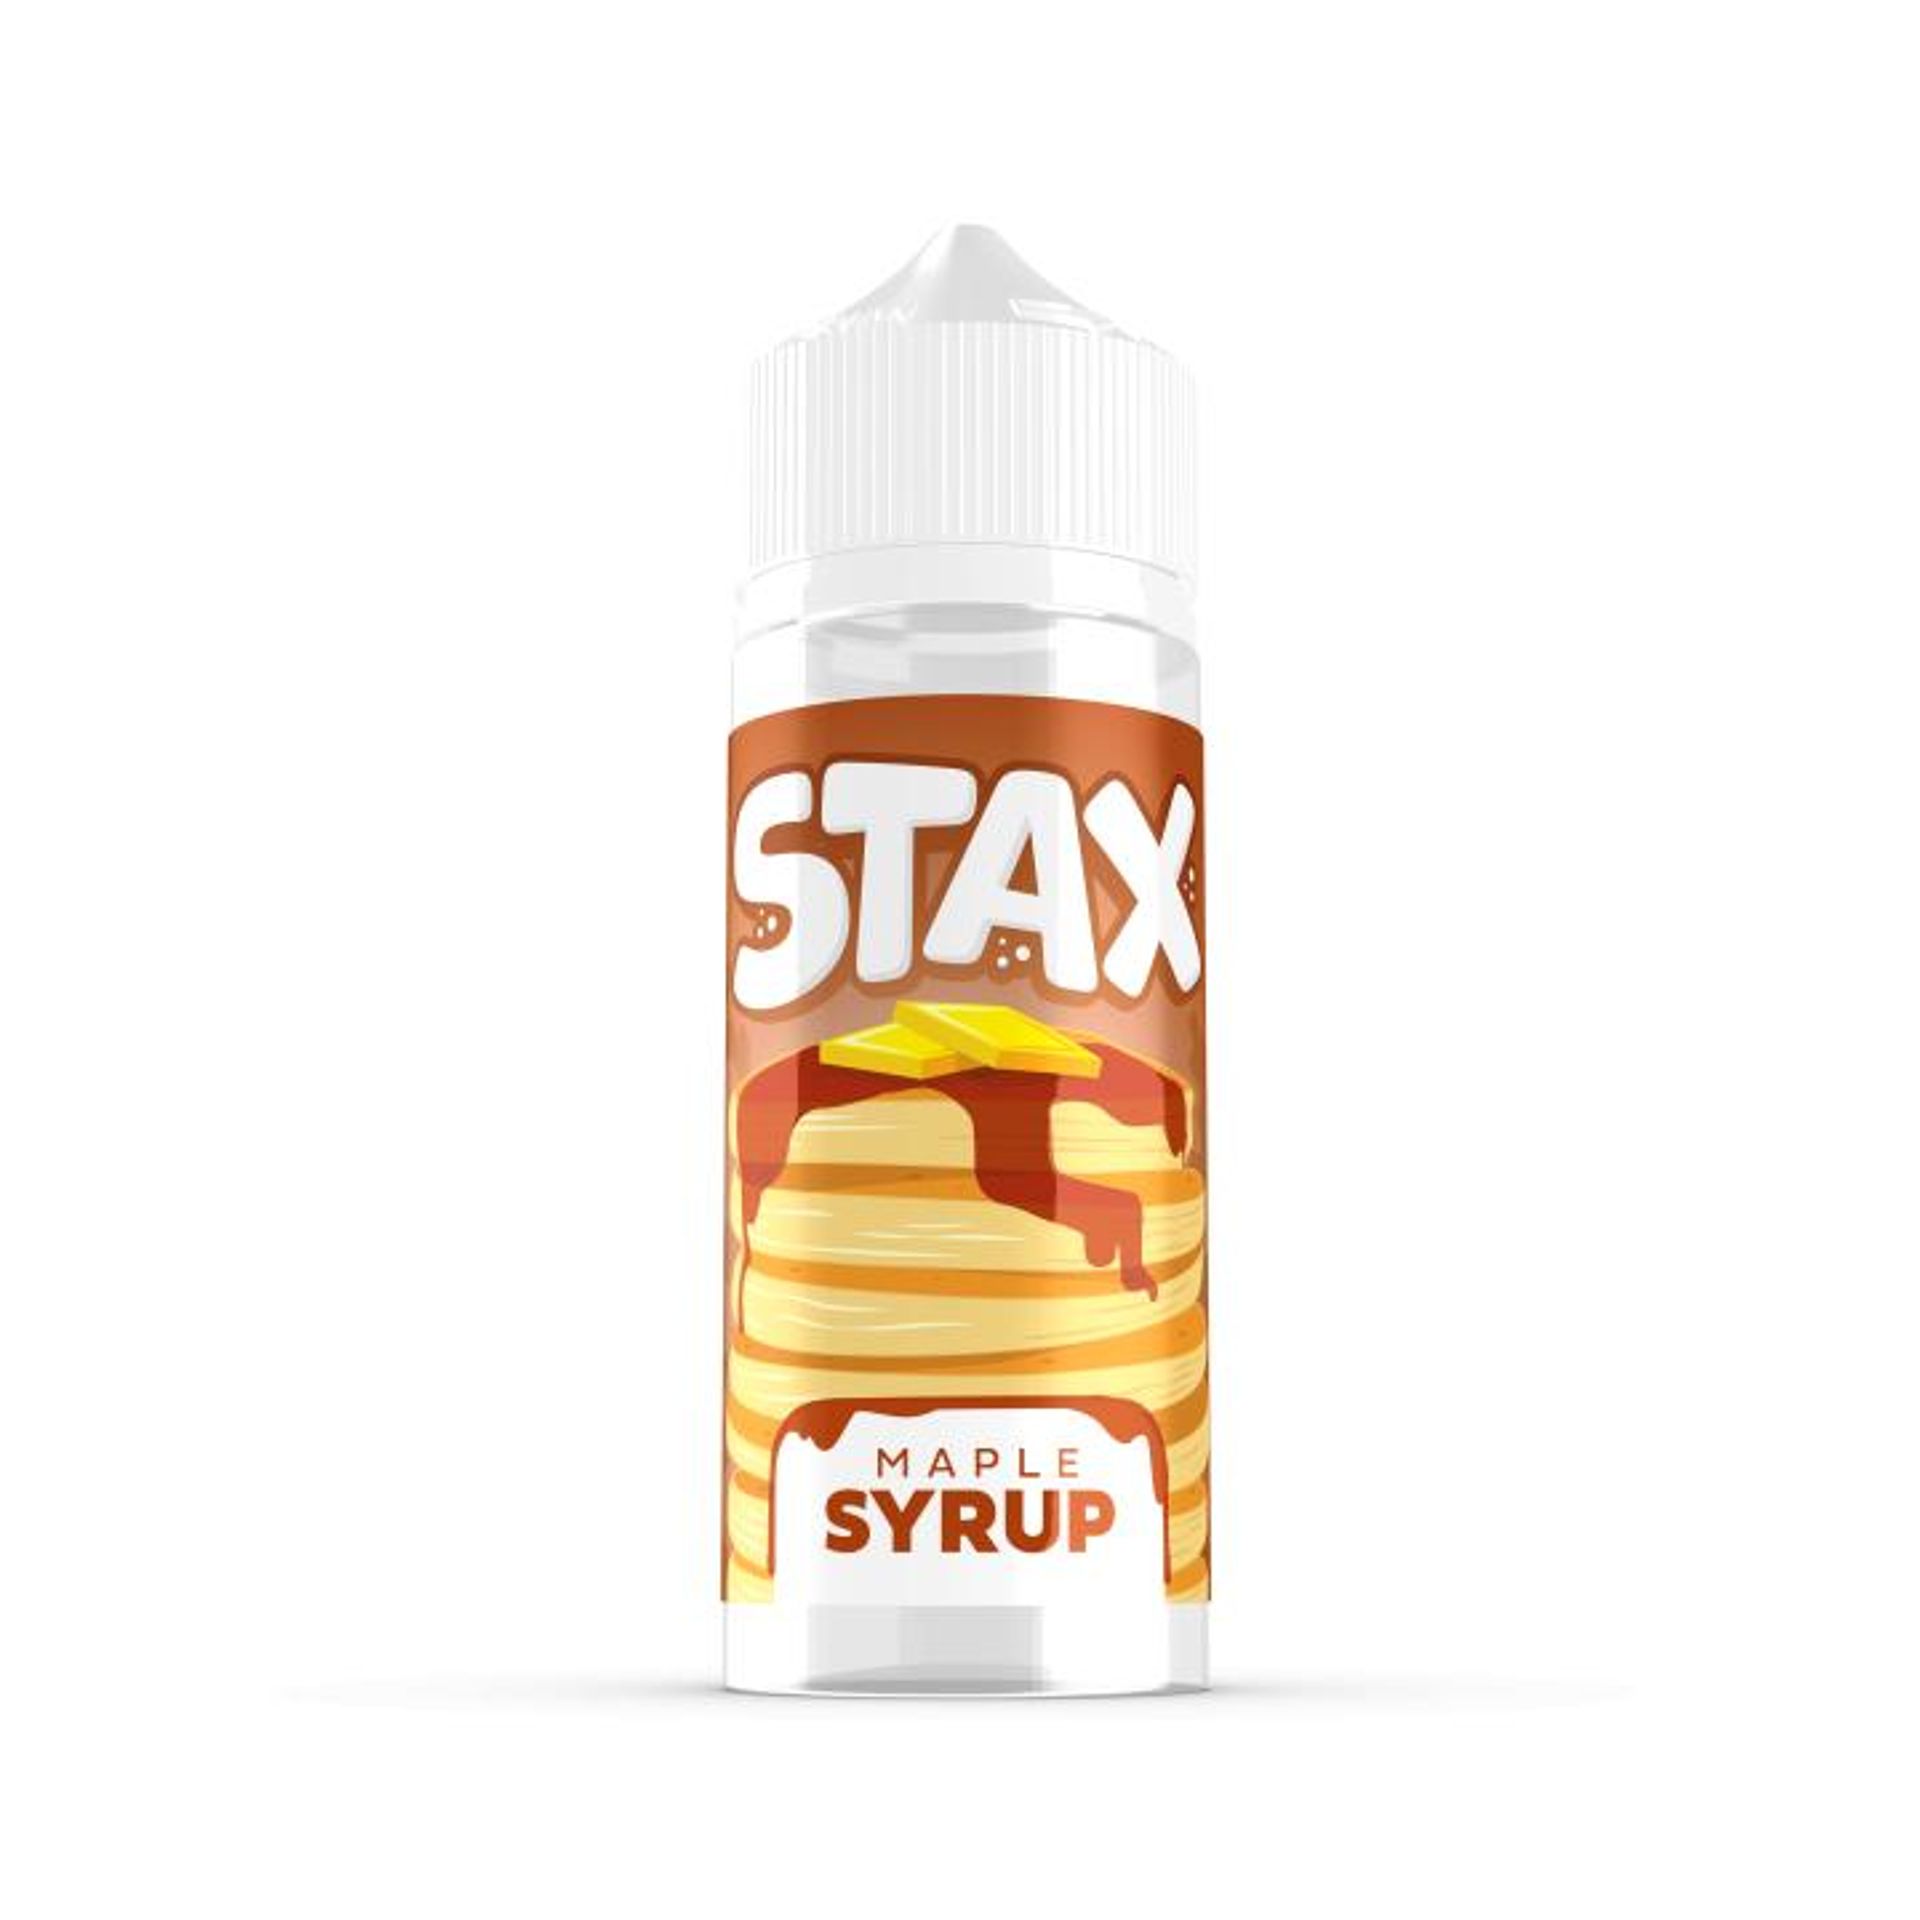 Image of Maple Syrup Pancakes by Stax